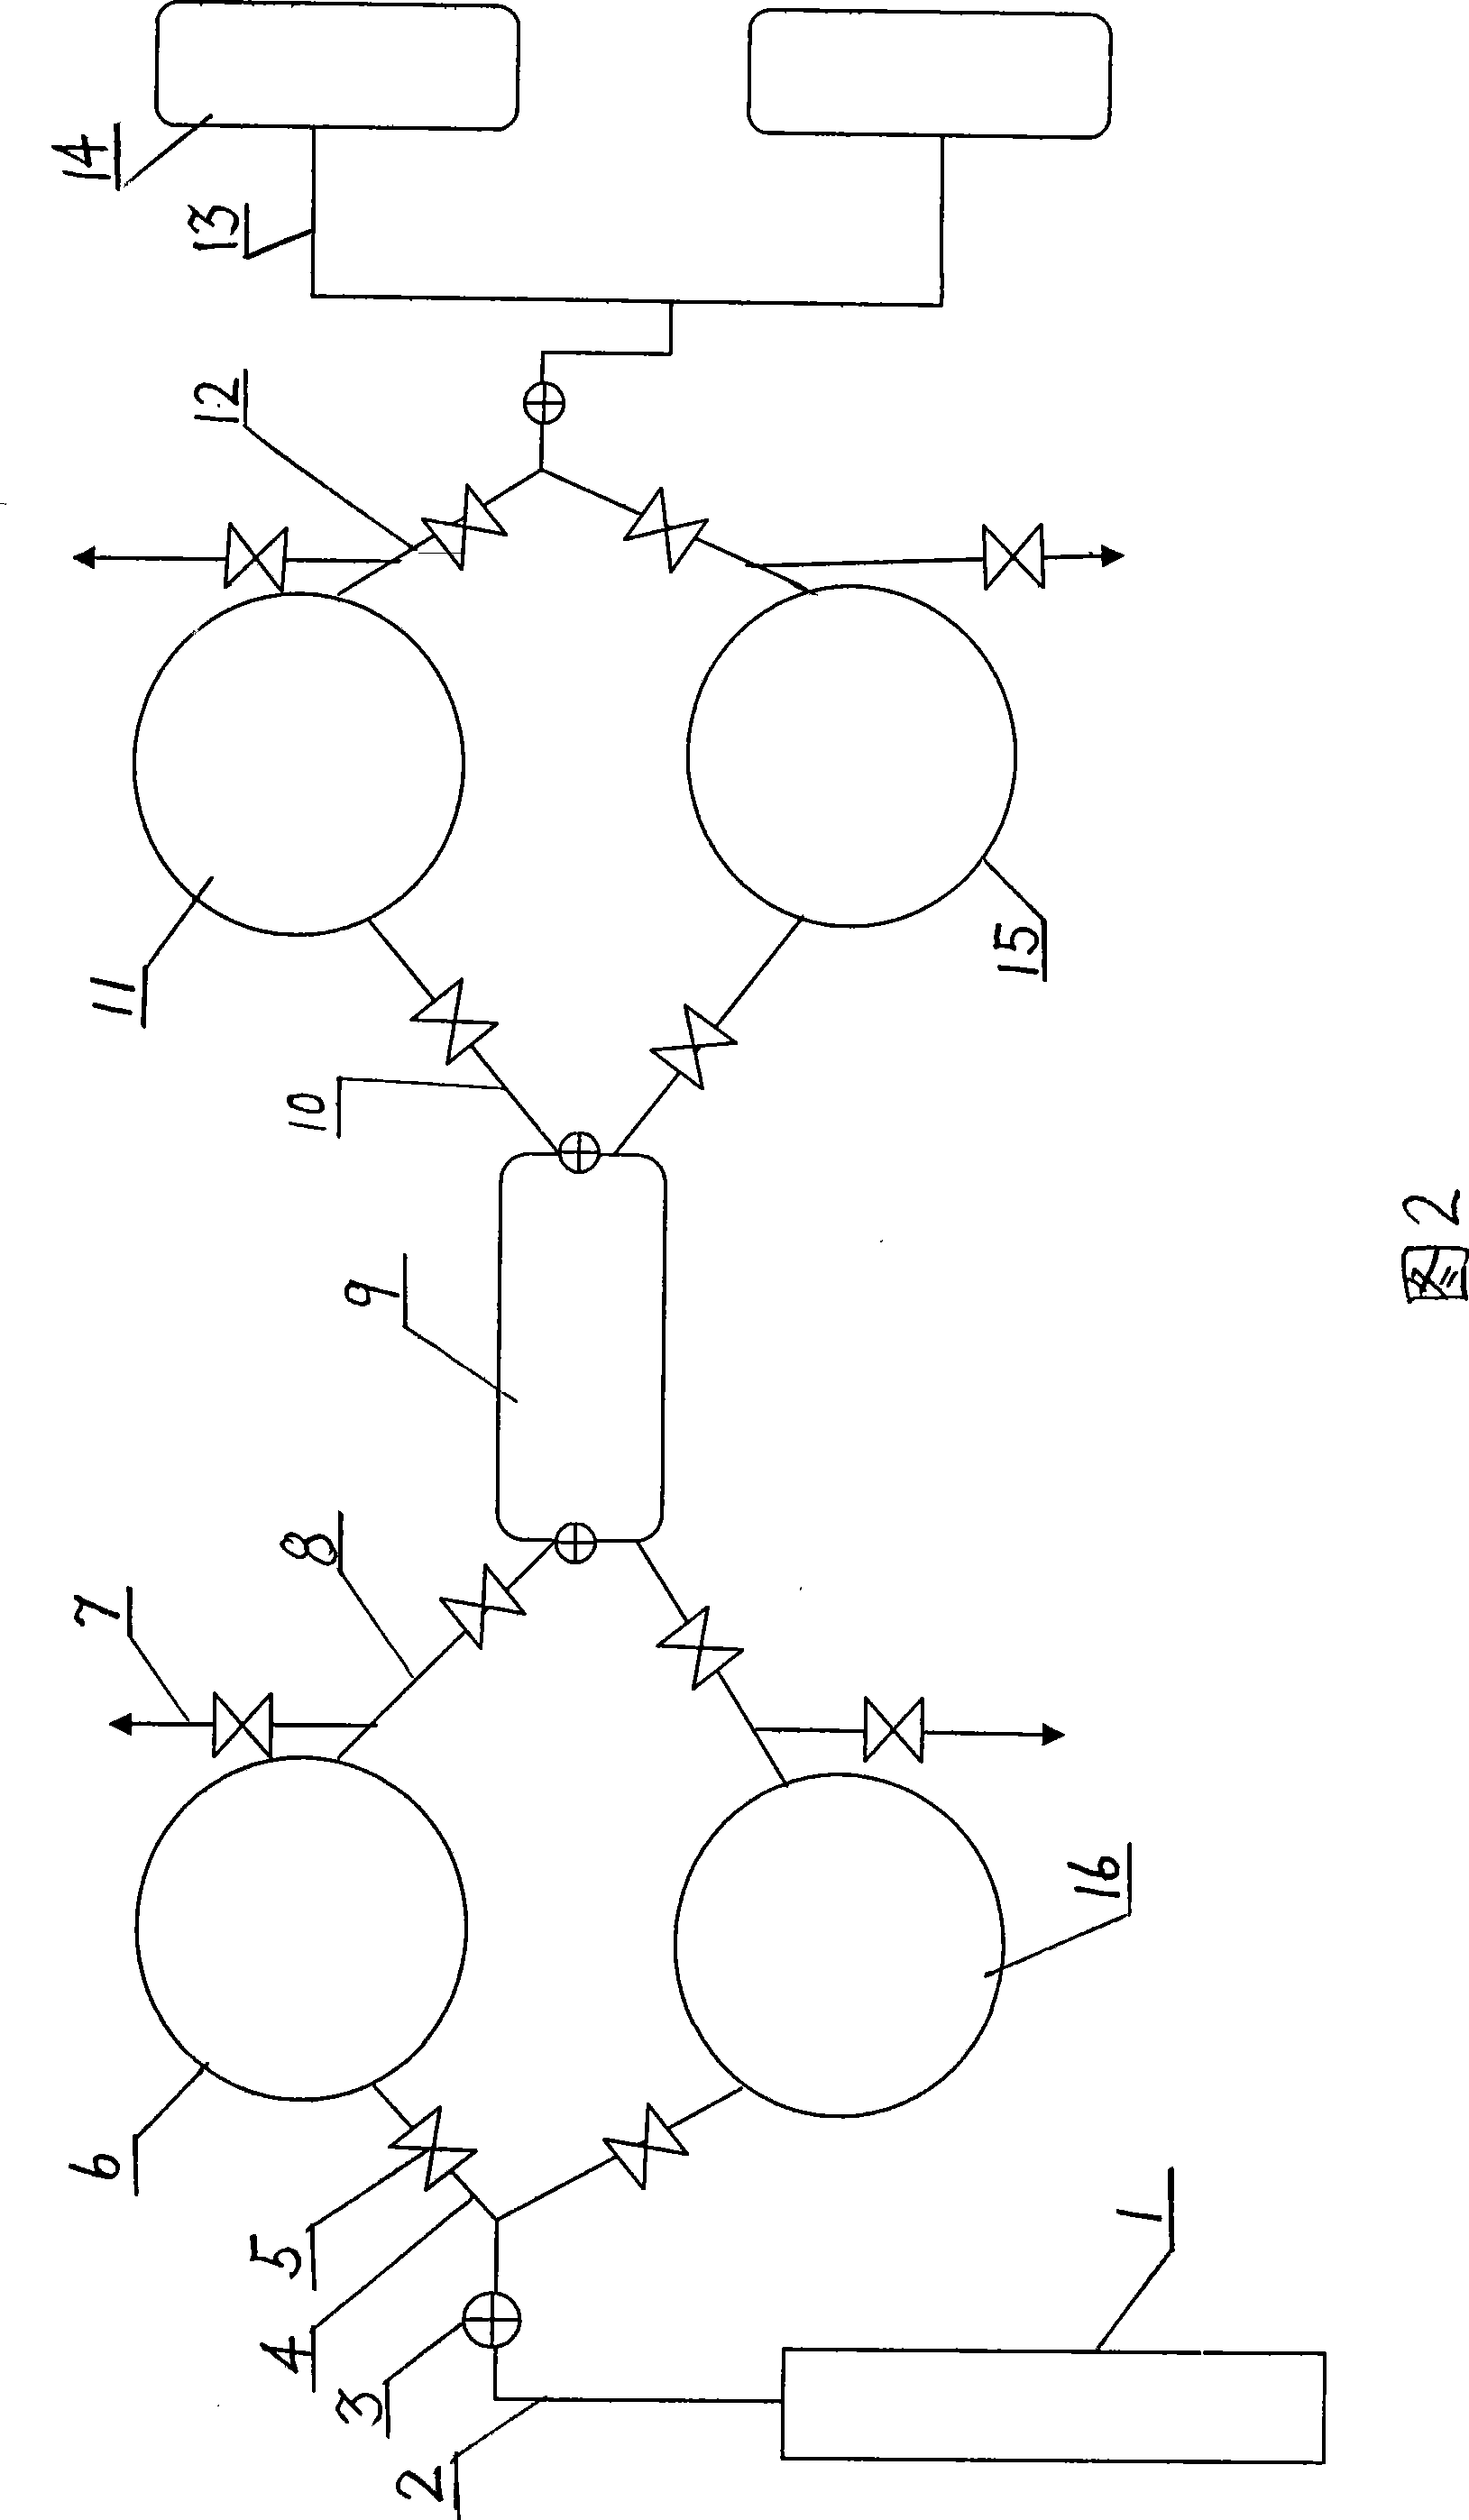 Method for producing terylene POY filament in scale by recycling PET bottle sheet material